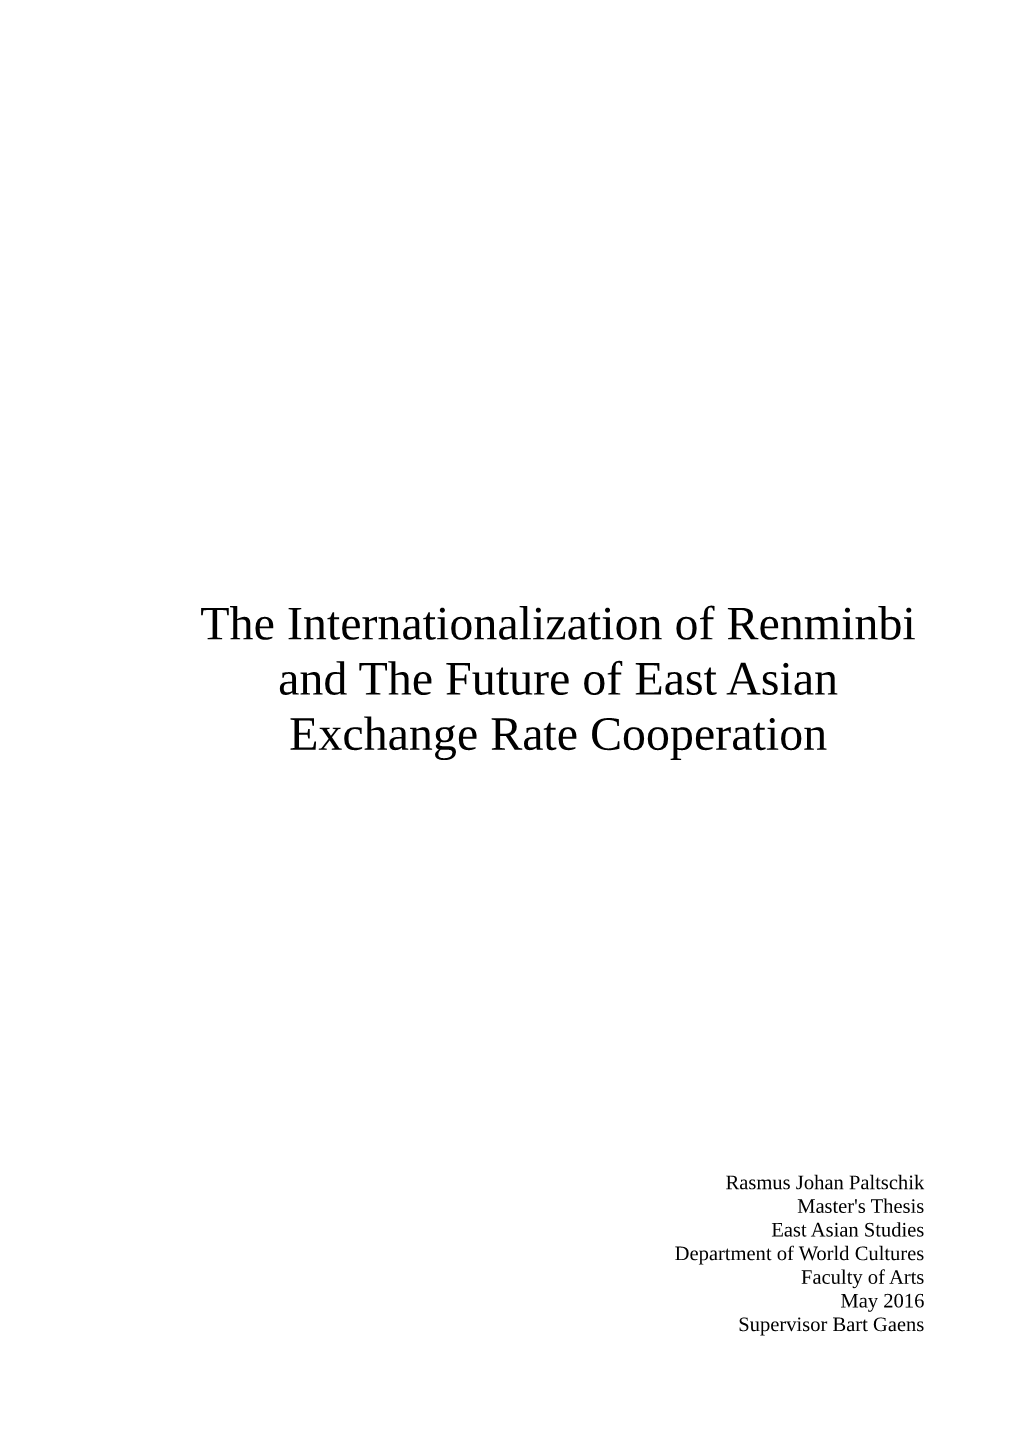 The Internationalization of Renminbi and the Future of East Asian Exchange Rate Cooperation